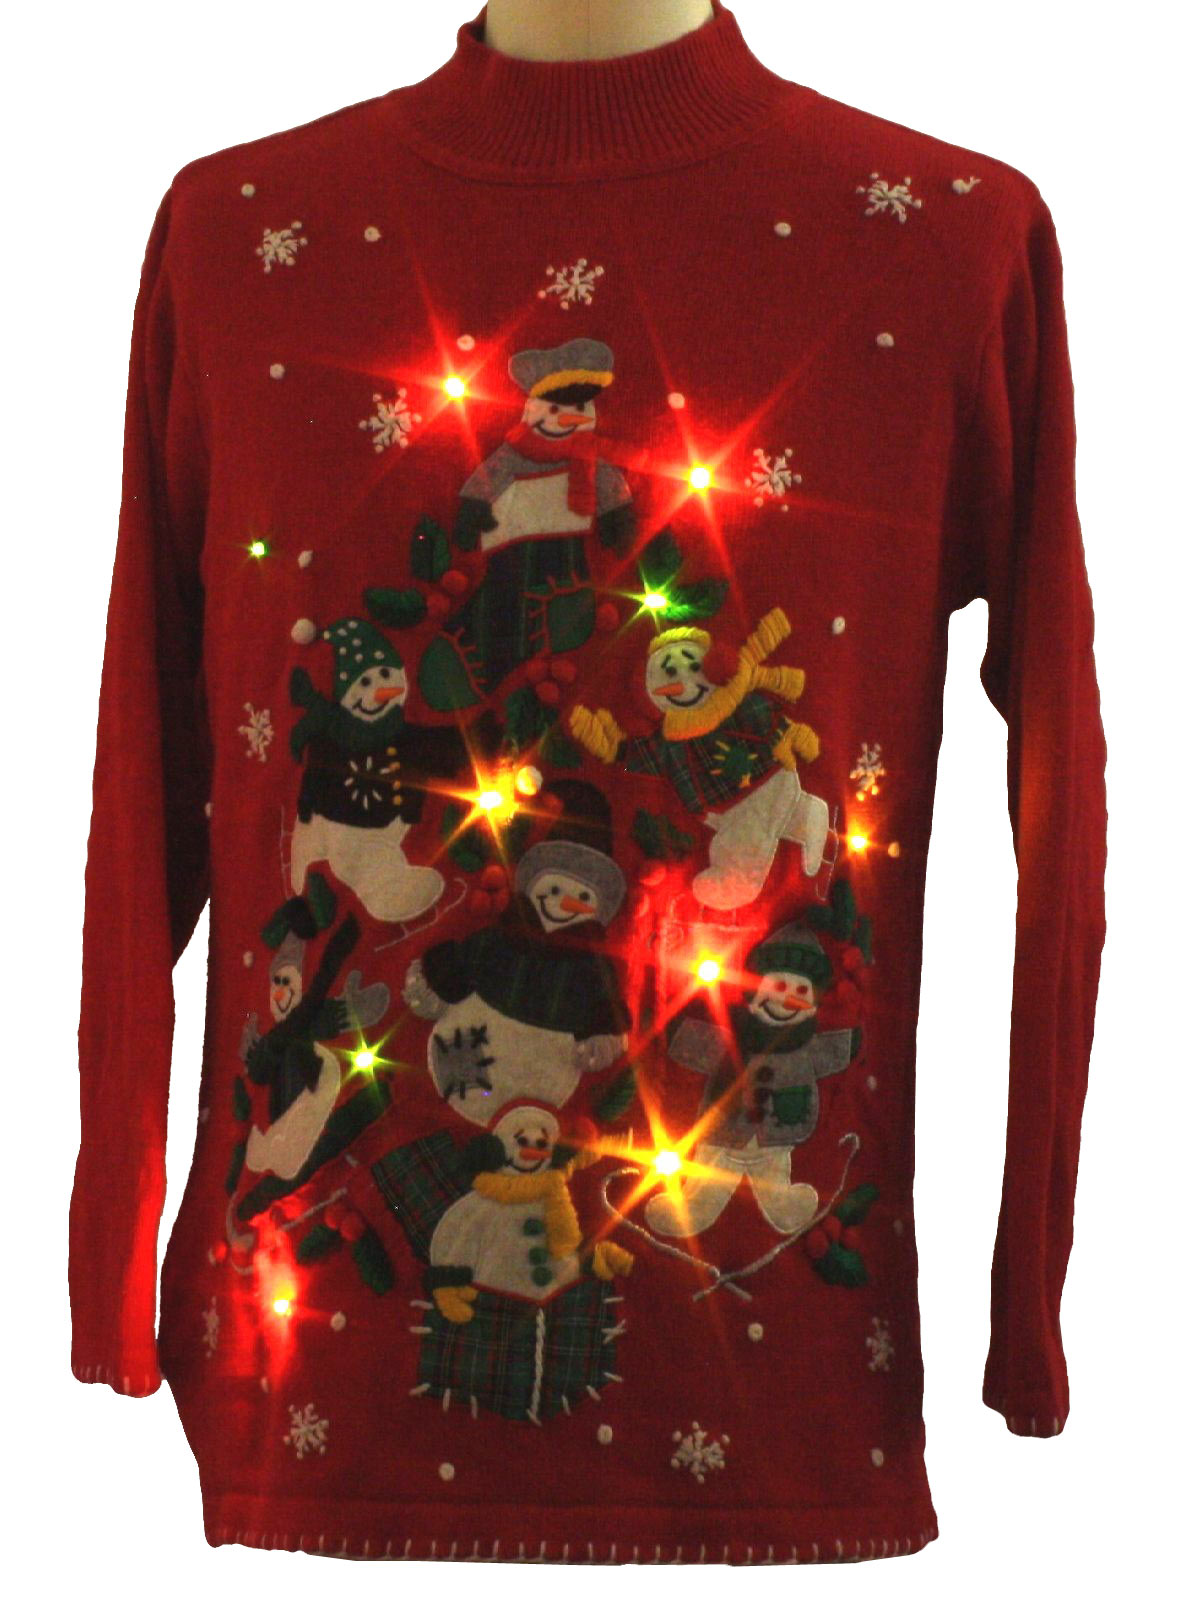 Lightup Ugly Christmas Sweater: -BP Design- Unisex red background ...